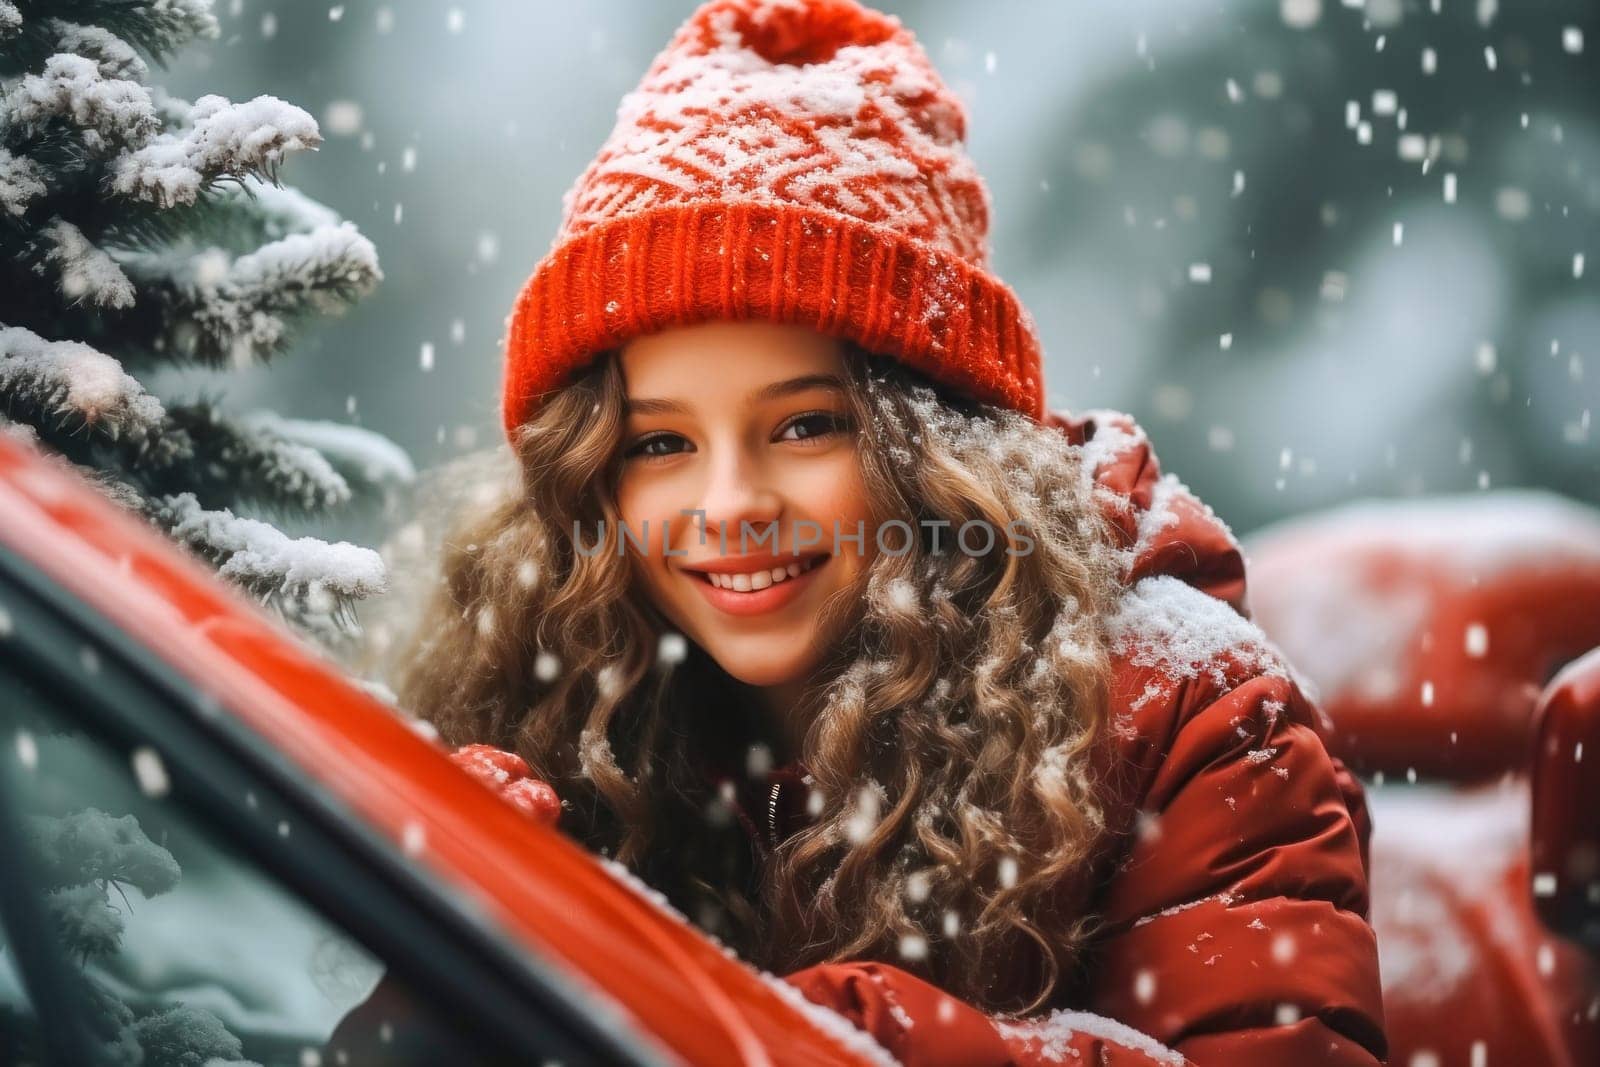 Happy girl in red hat standing by car on snowfall background in winter/